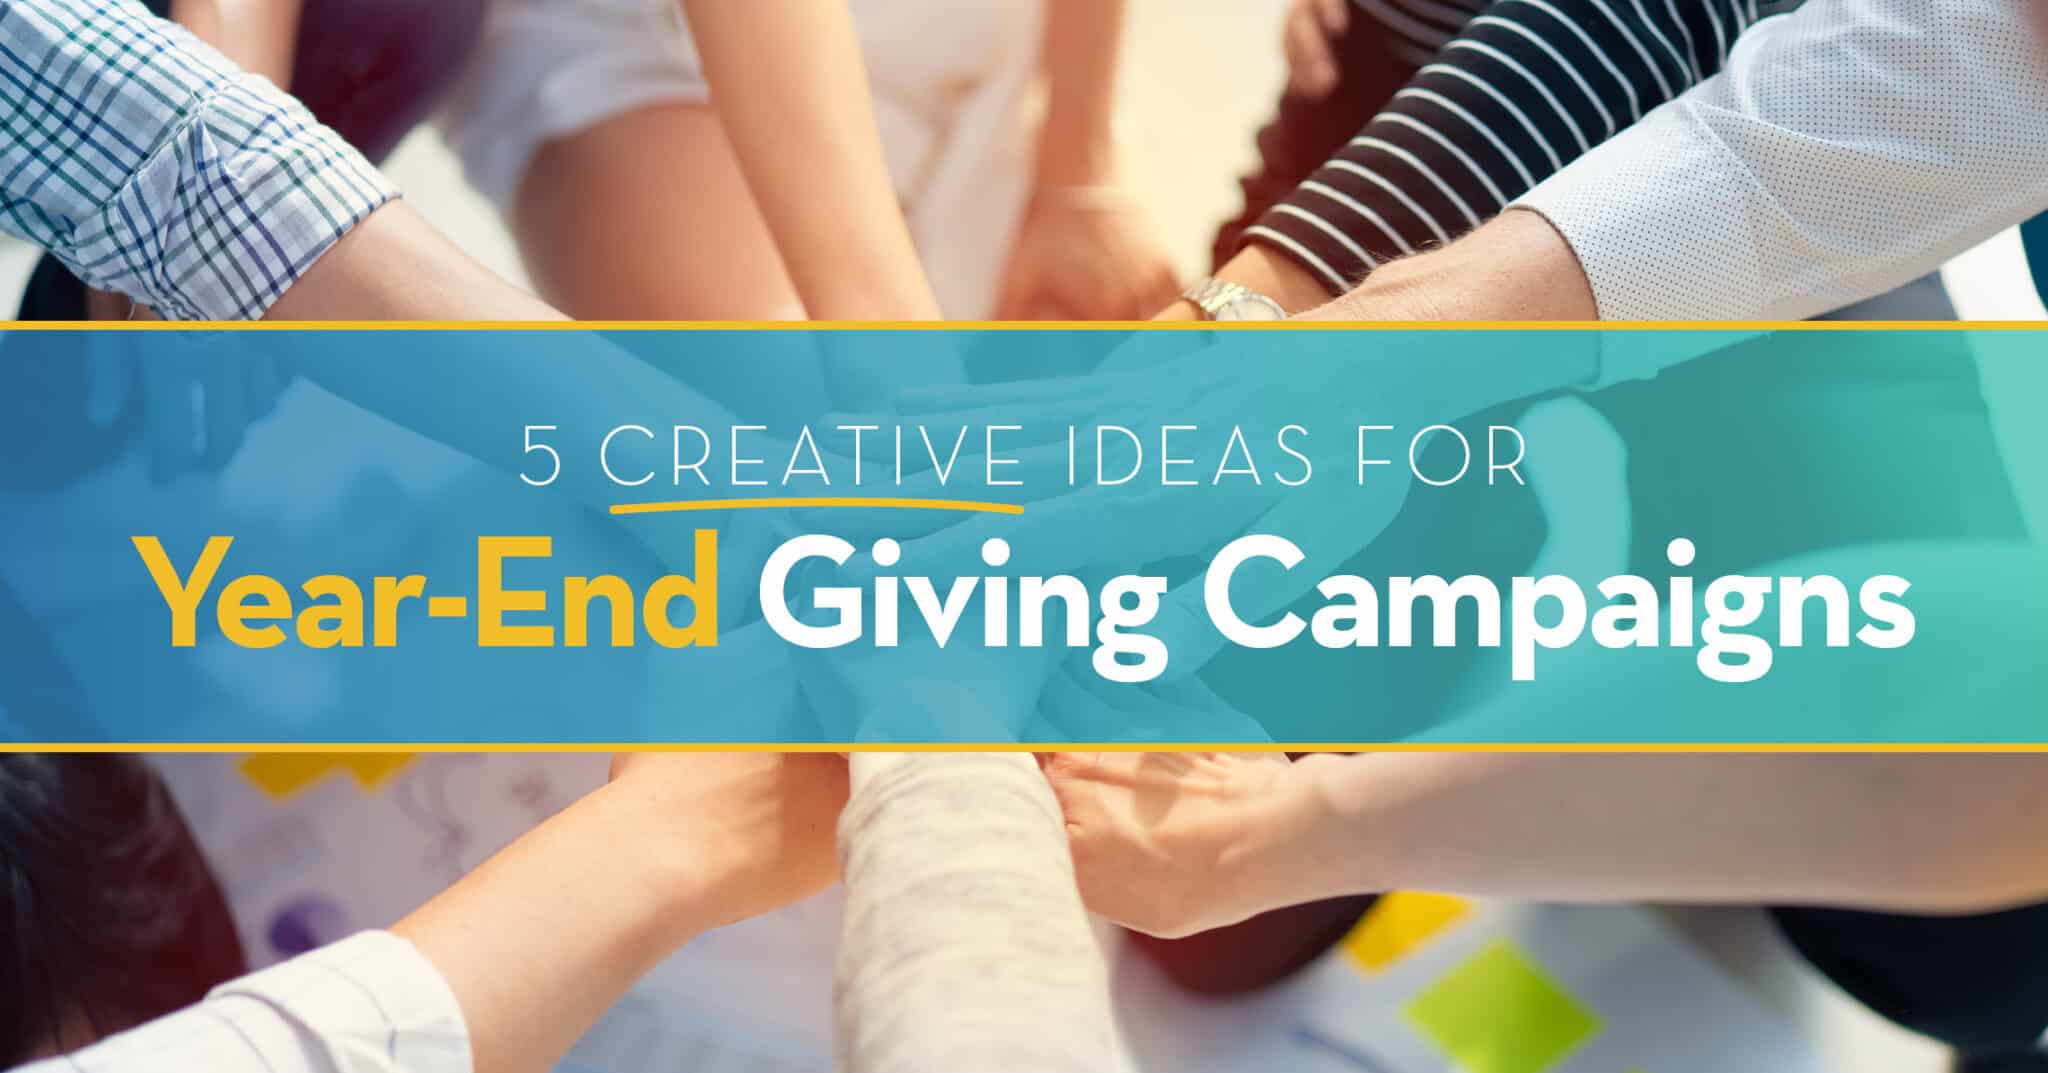 5 CREATIVE IDEAS FOR YEAR-END GIVING CAMPAIGNS